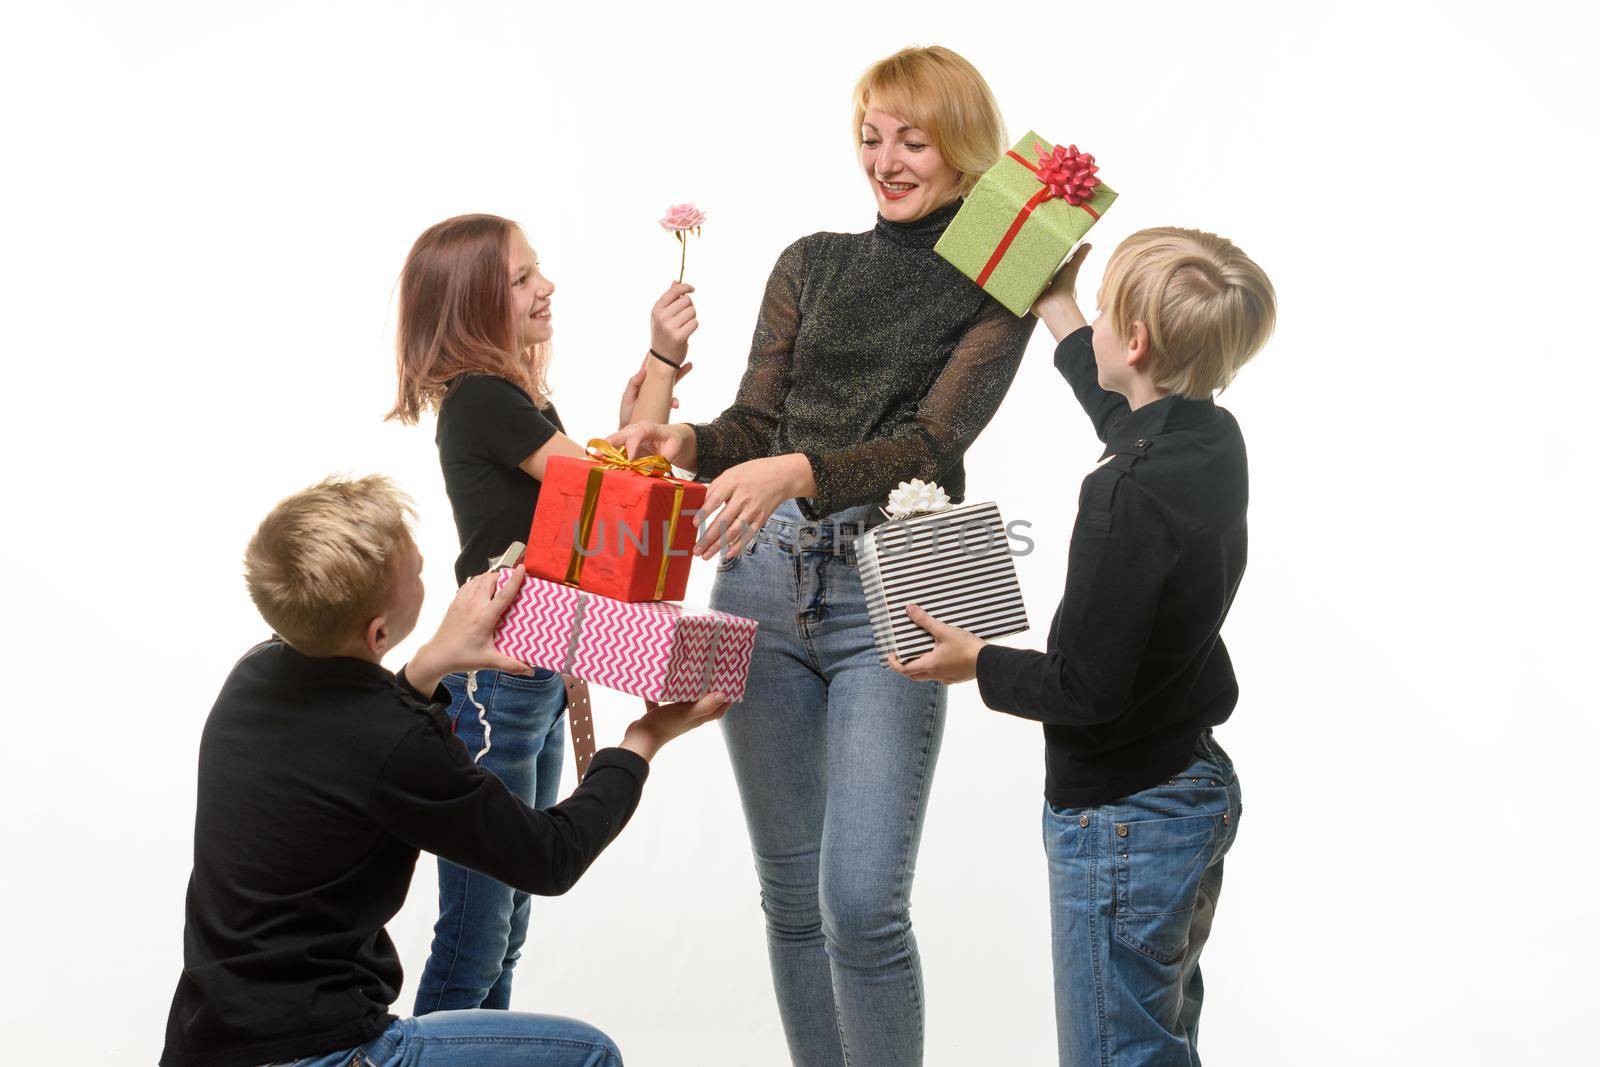 Children give a gift to mom, boys give a gift in boxes, flower girl